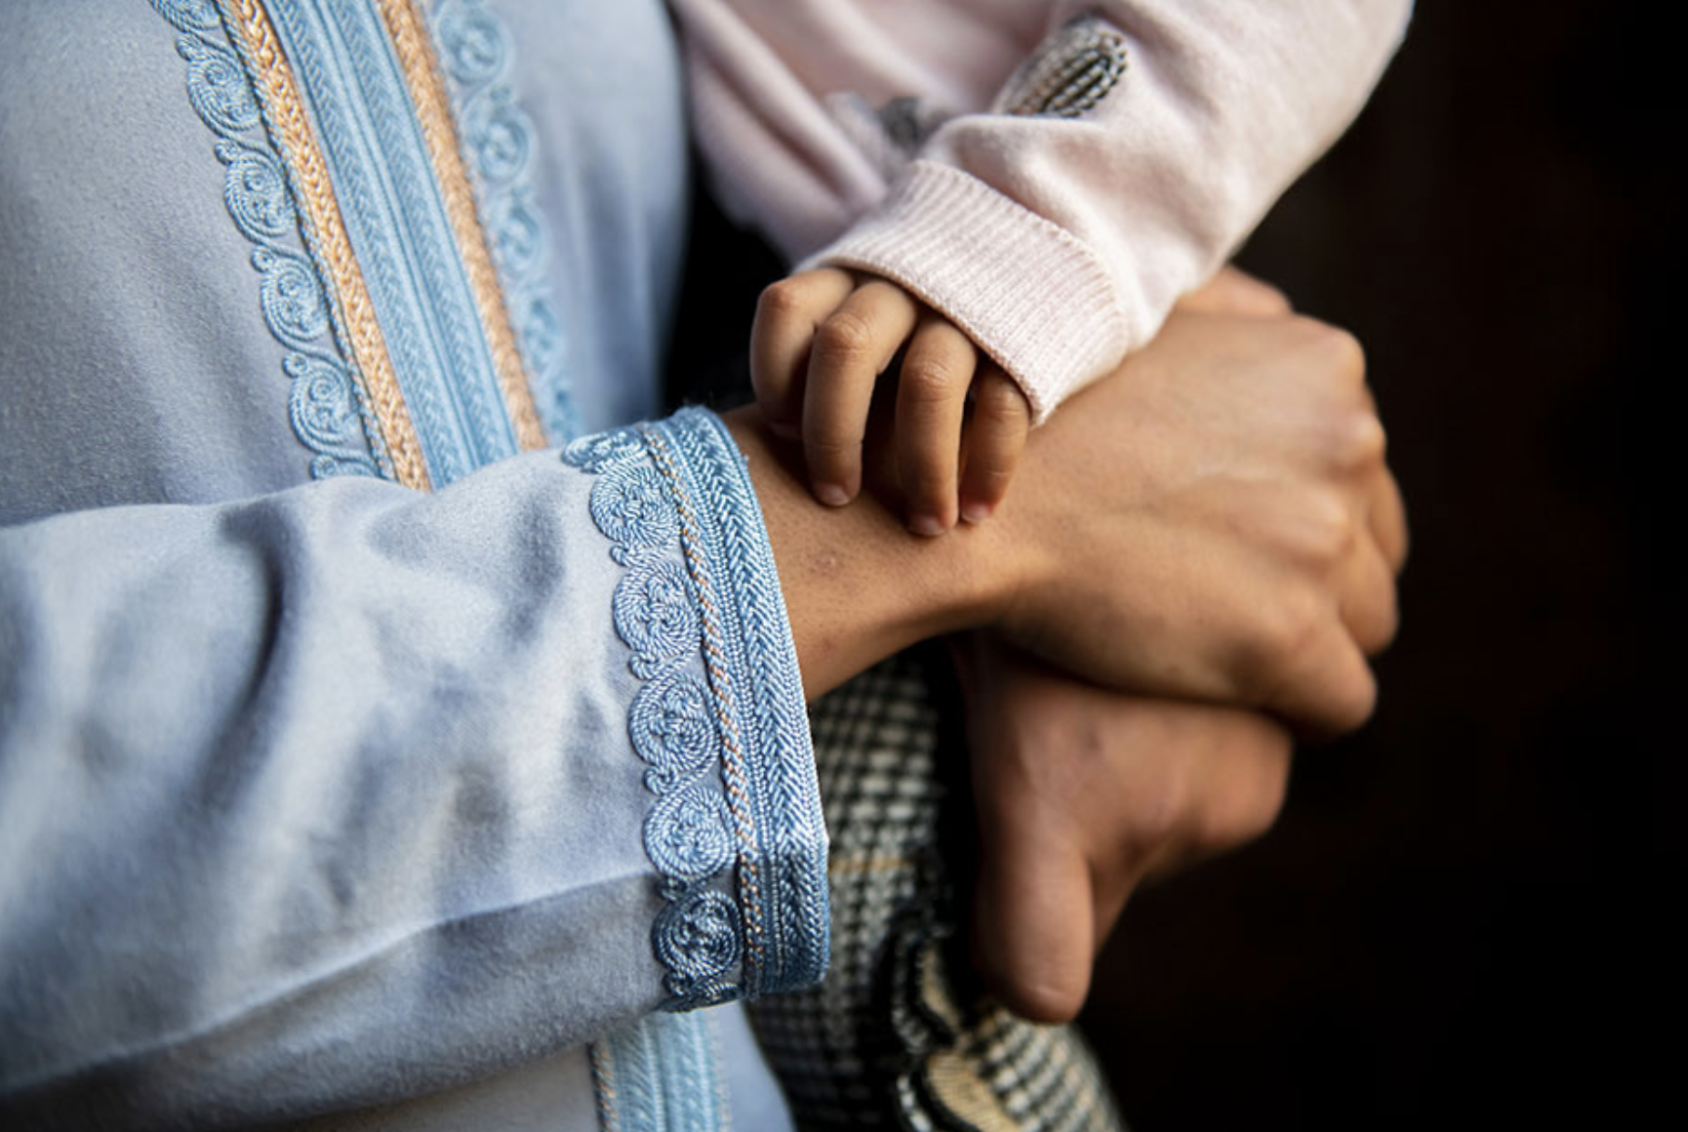 A close up image of hands, in which a man holds up his baby girl.